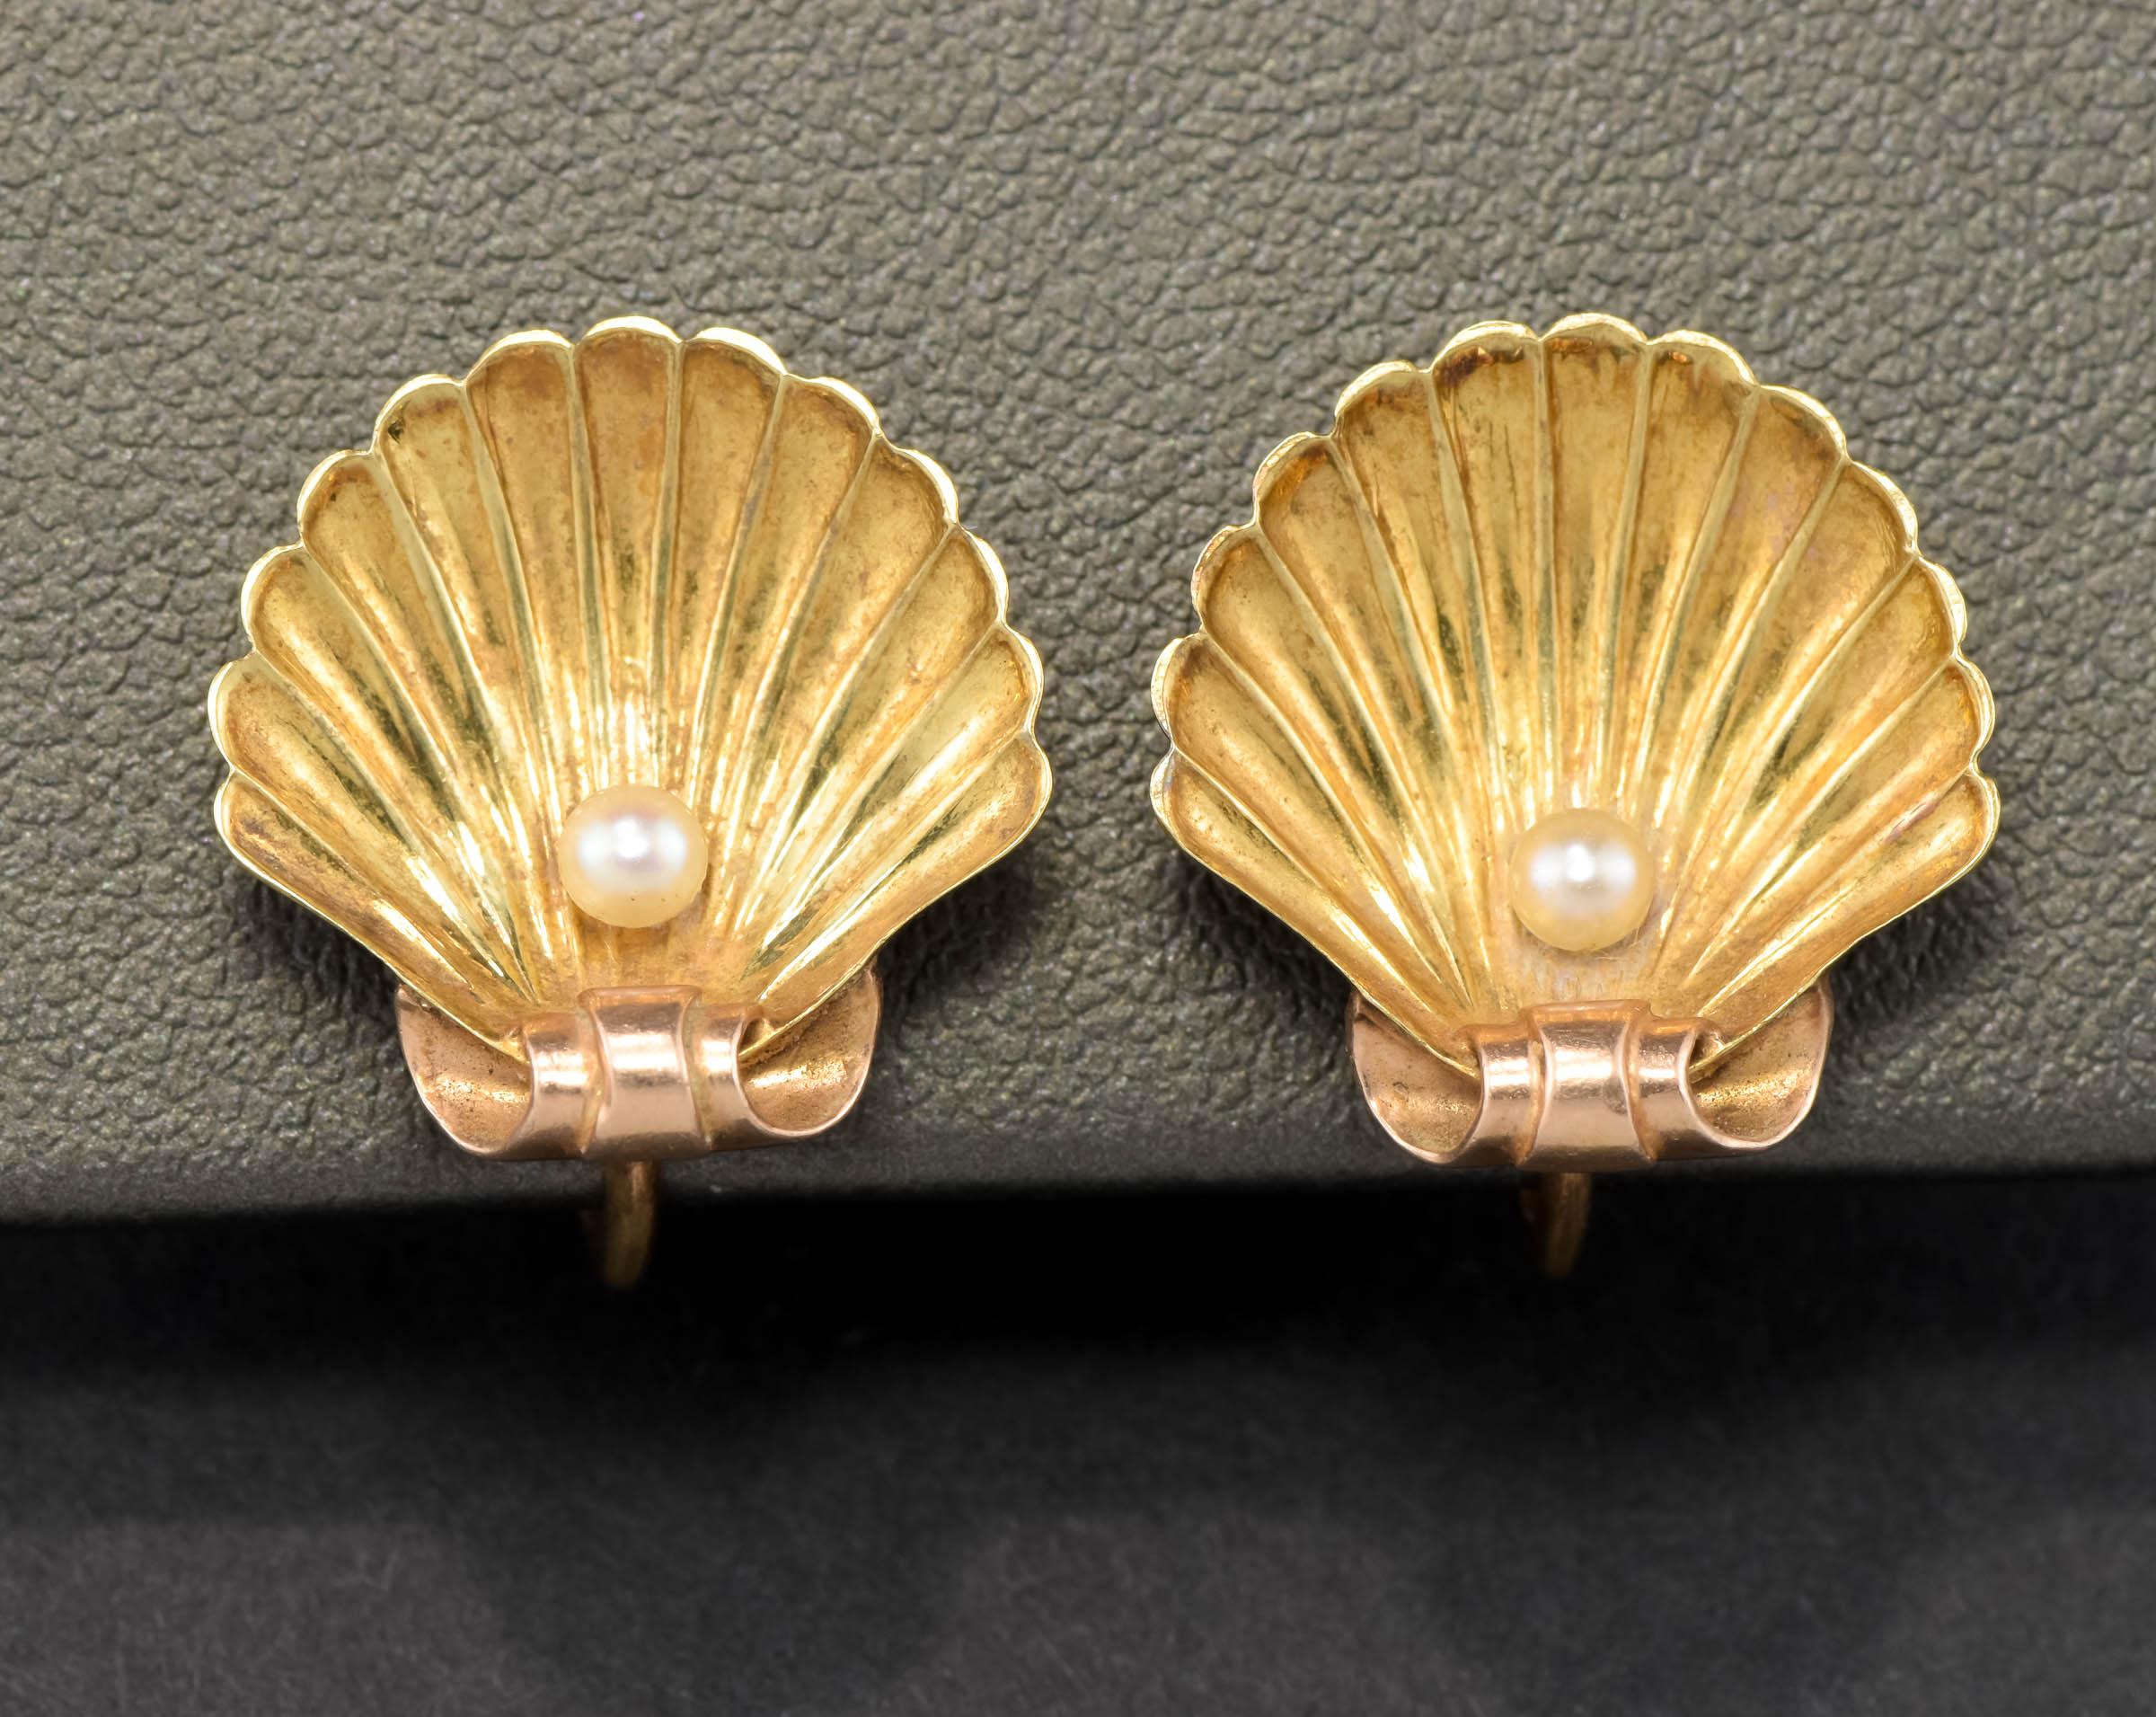 Antique 14K Gold Shell Earrings w Pearls by Sloan & Co. French Screw Back Style For Sale 8